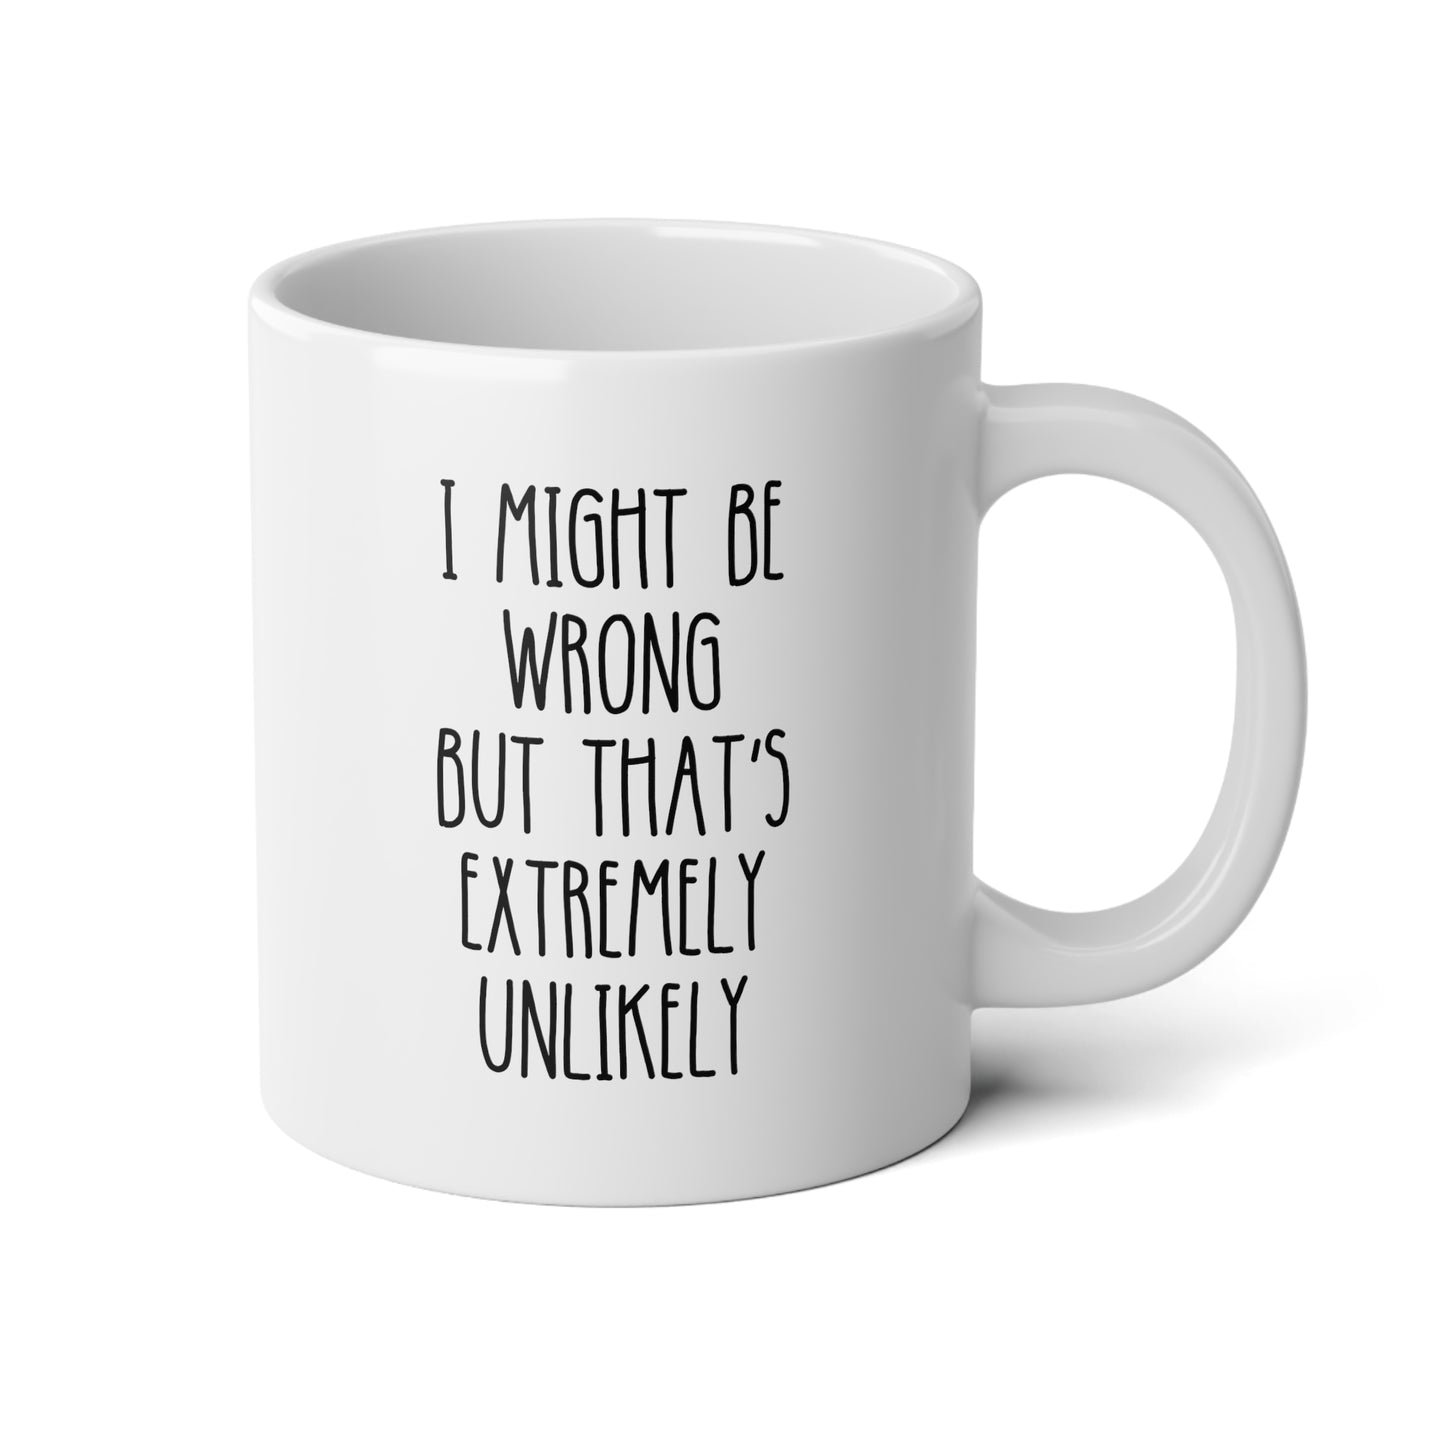 I Might Be Wrong But That's Extremely Unlikely 20oz white funny large coffee mug gift for­ coworker work saying sarcastic waveywares wavey wares wavywares wavy wares